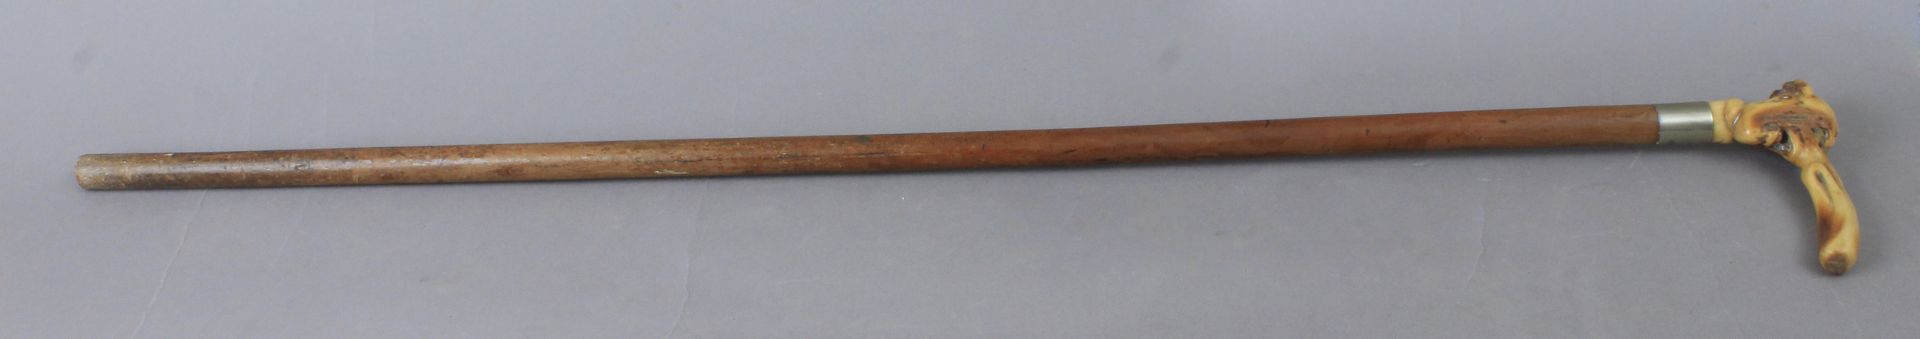 A 19th century walking stick - Image 2 of 3